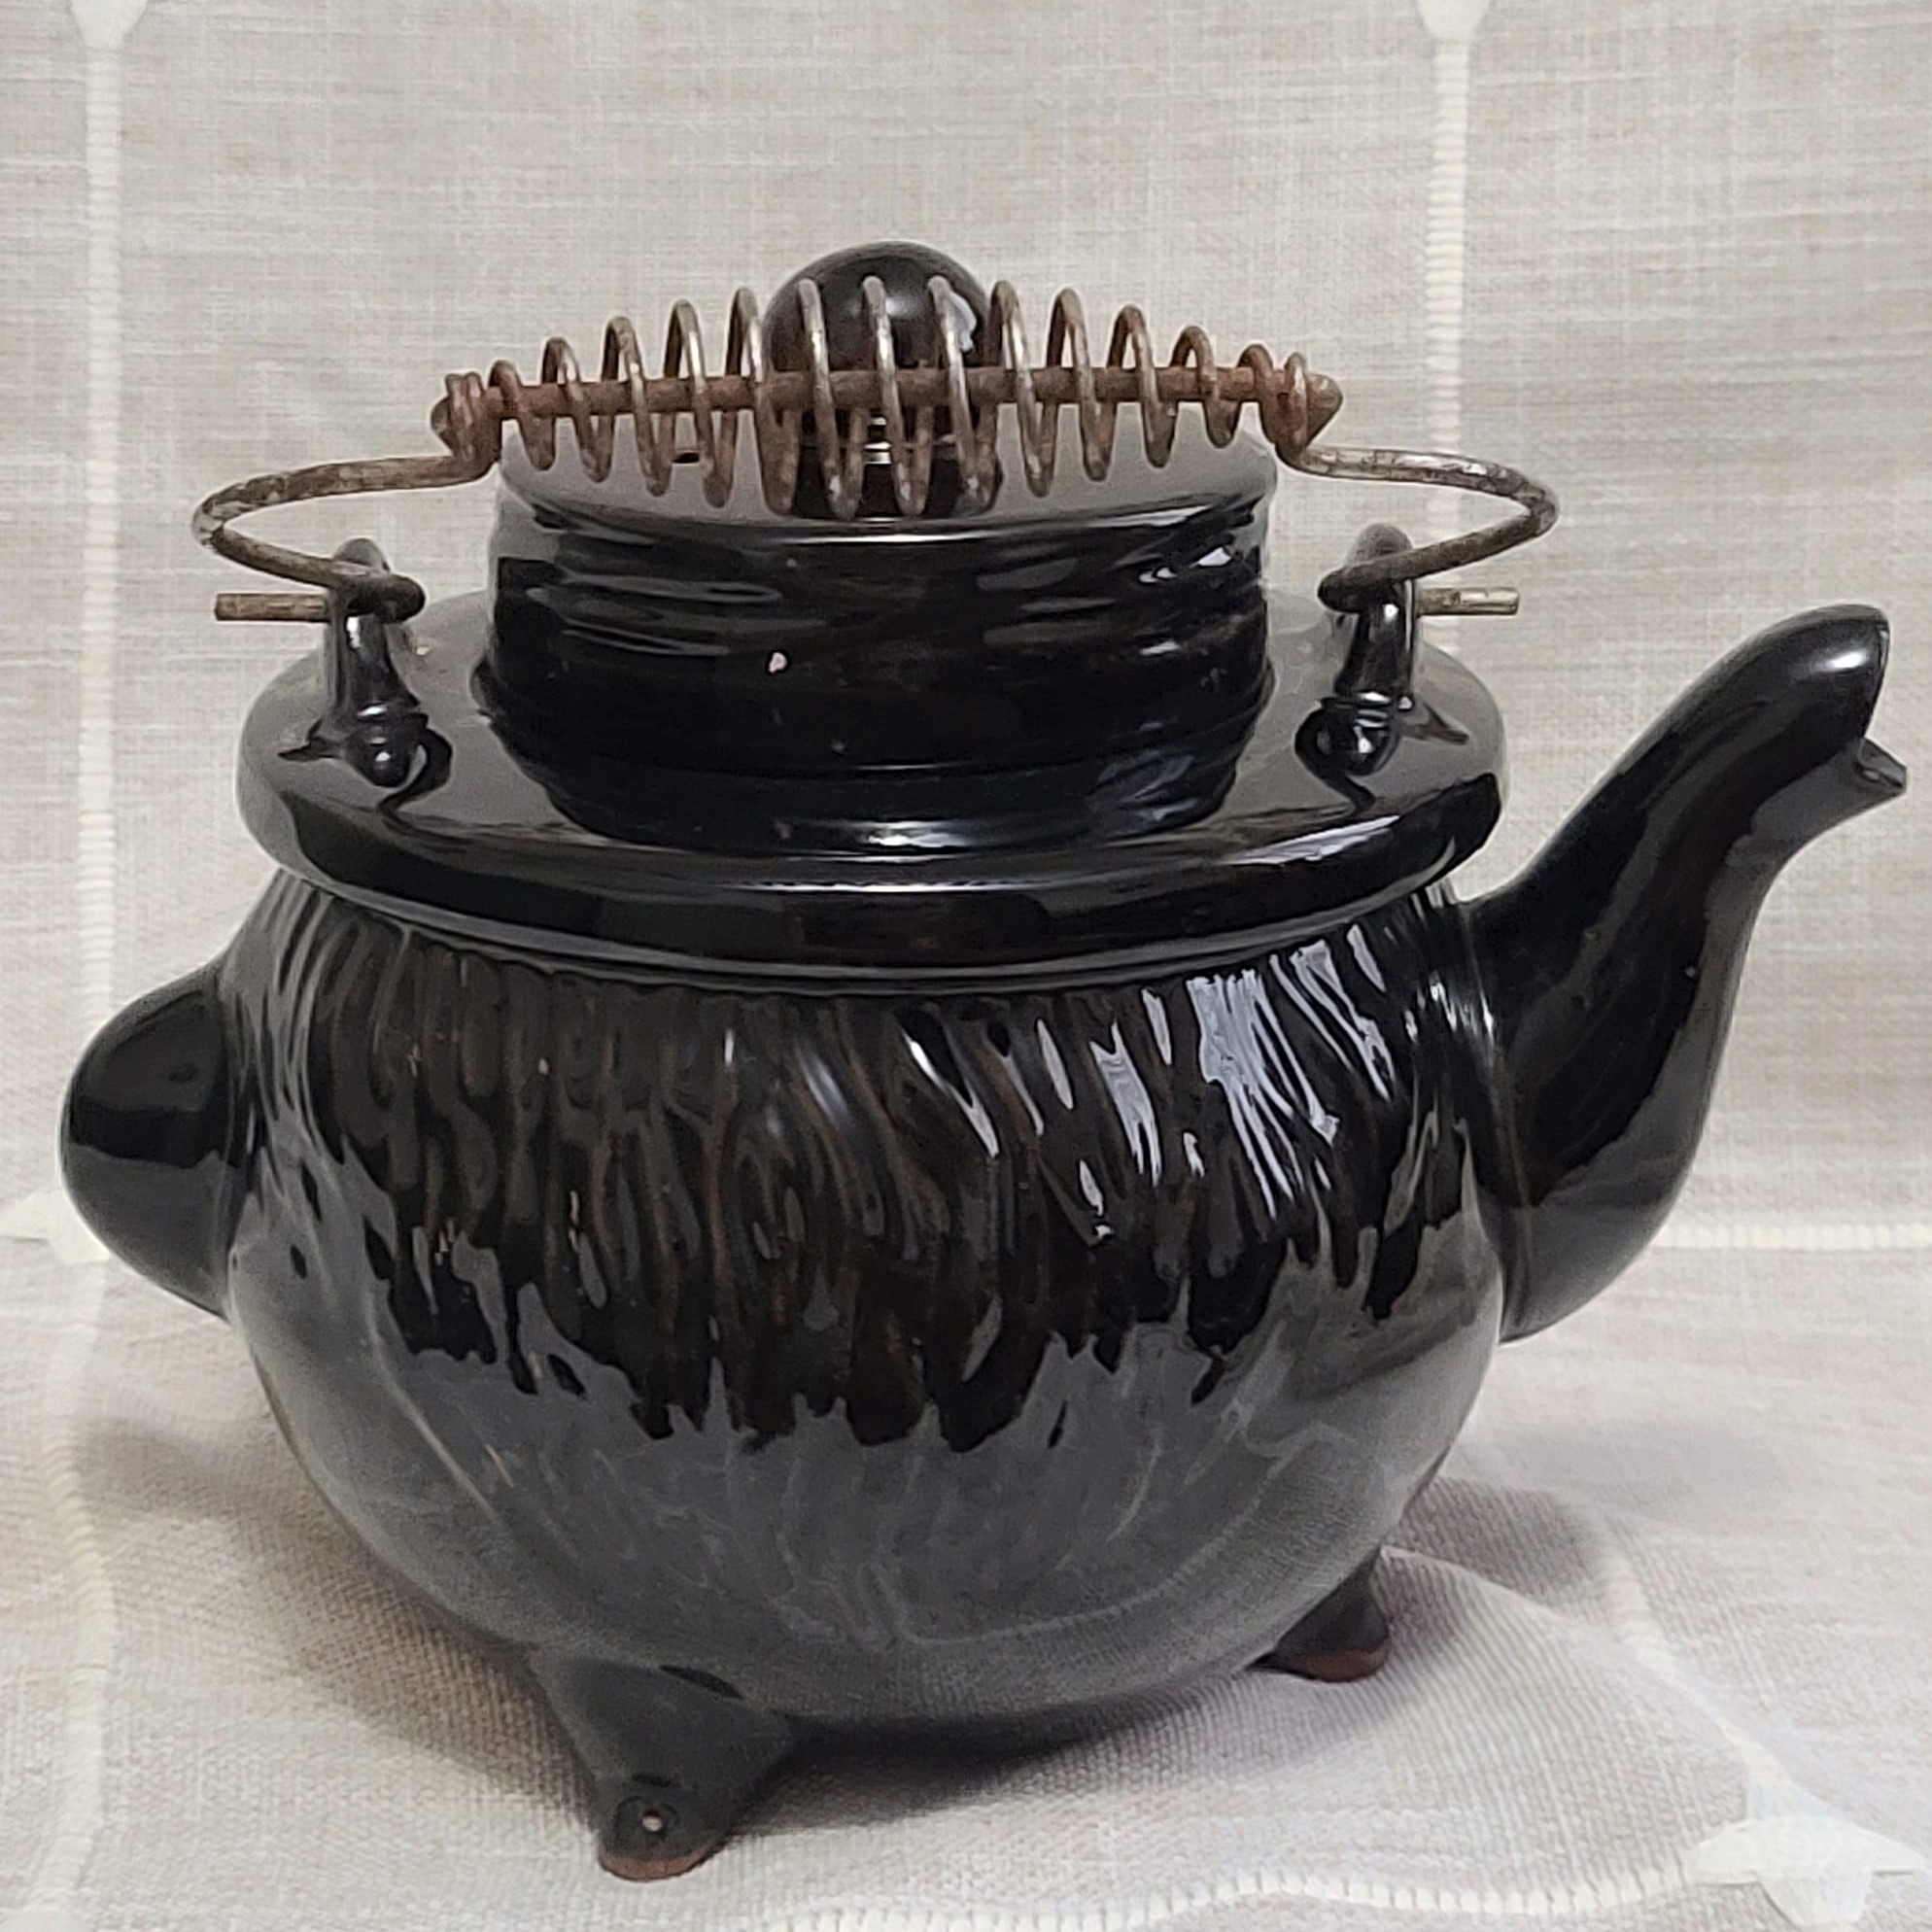 Vintage Thames Pottery Brown Clown Teapot with Wire coil handle